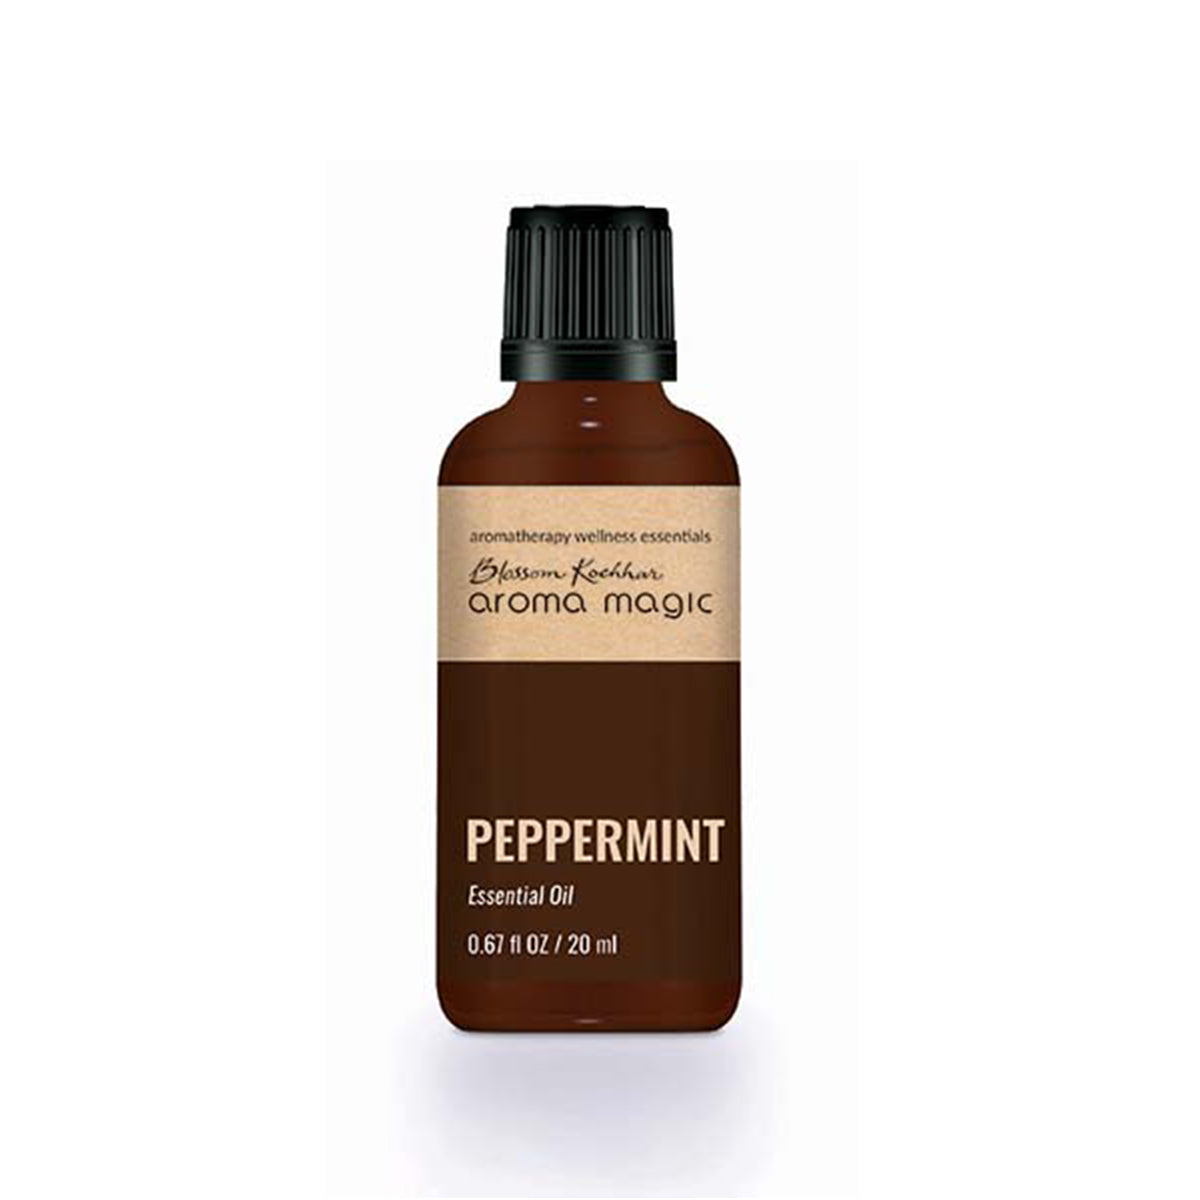 Peppermint Essential Oil Online Buy Essential Oils Online India 7183